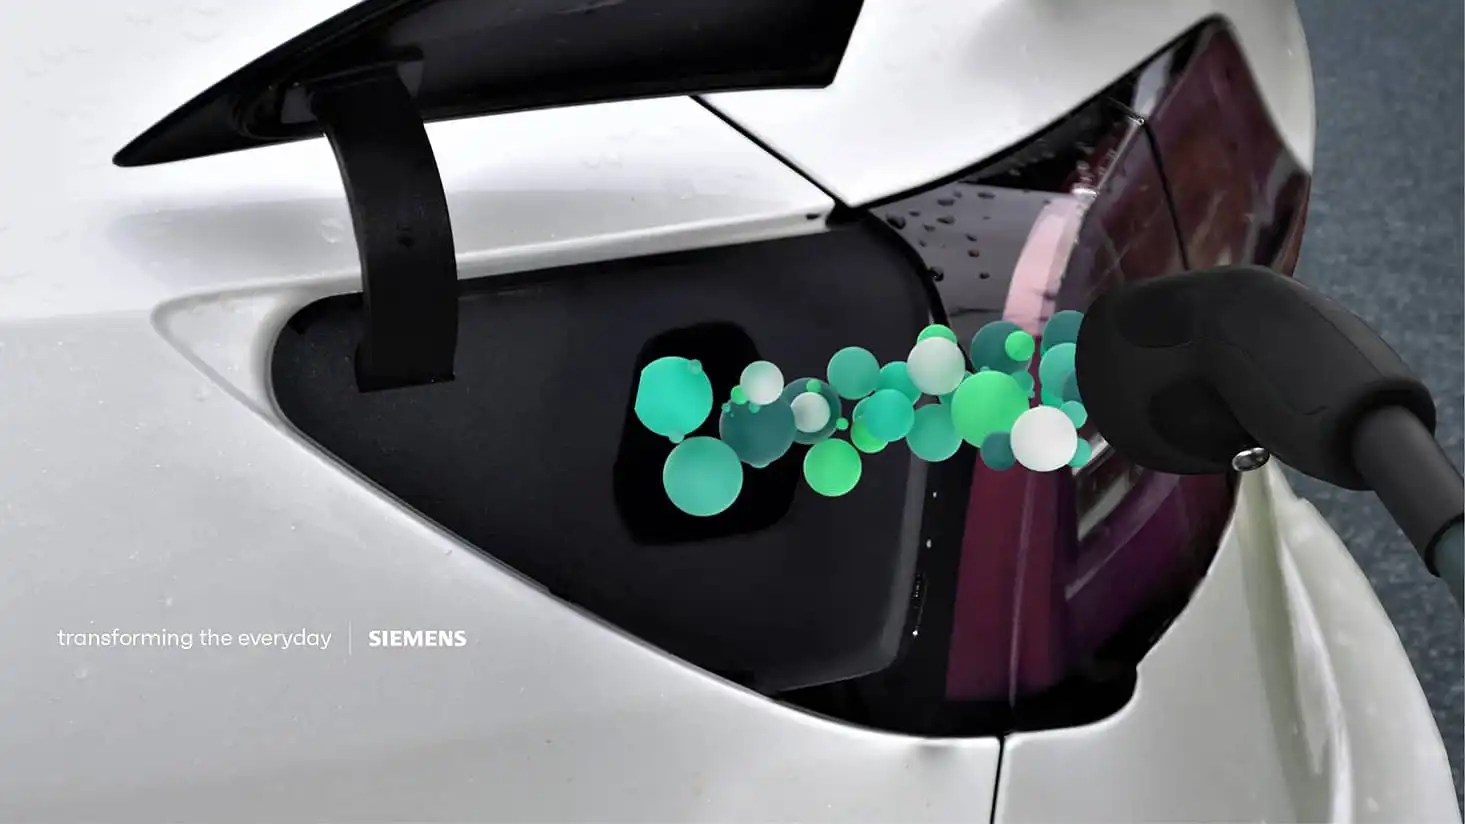 Siemens' technology that recharge a car's battery